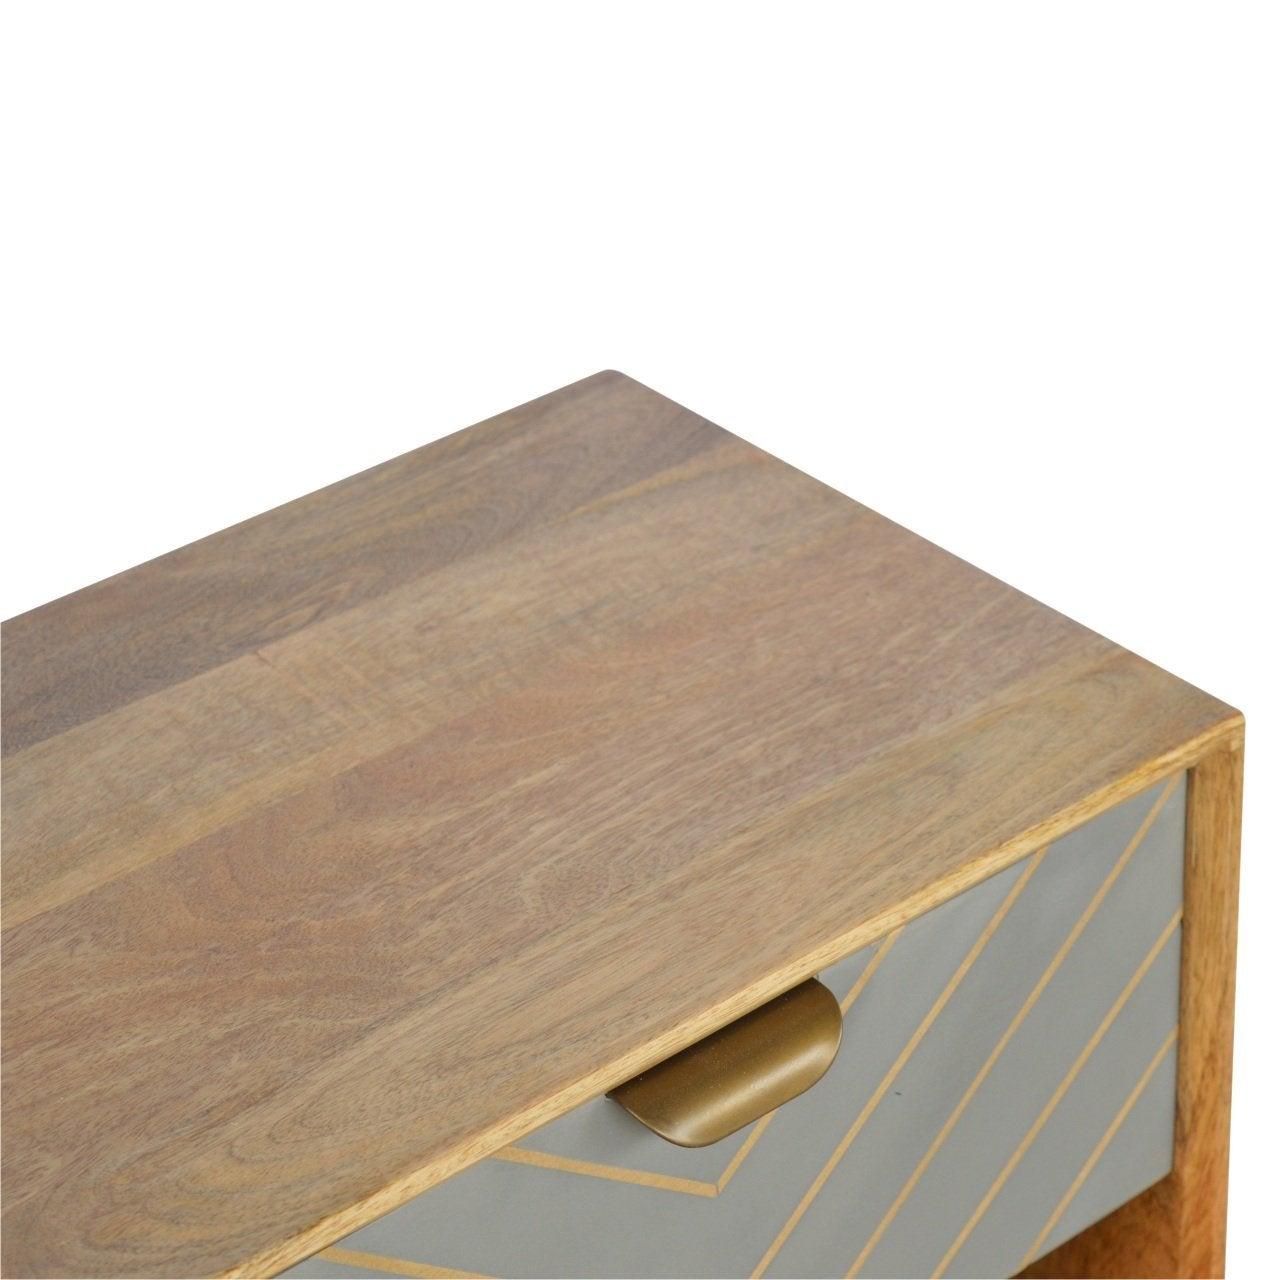 Sleek cement brass inlay bedside table with open slot - crimblefest furniture - image 7